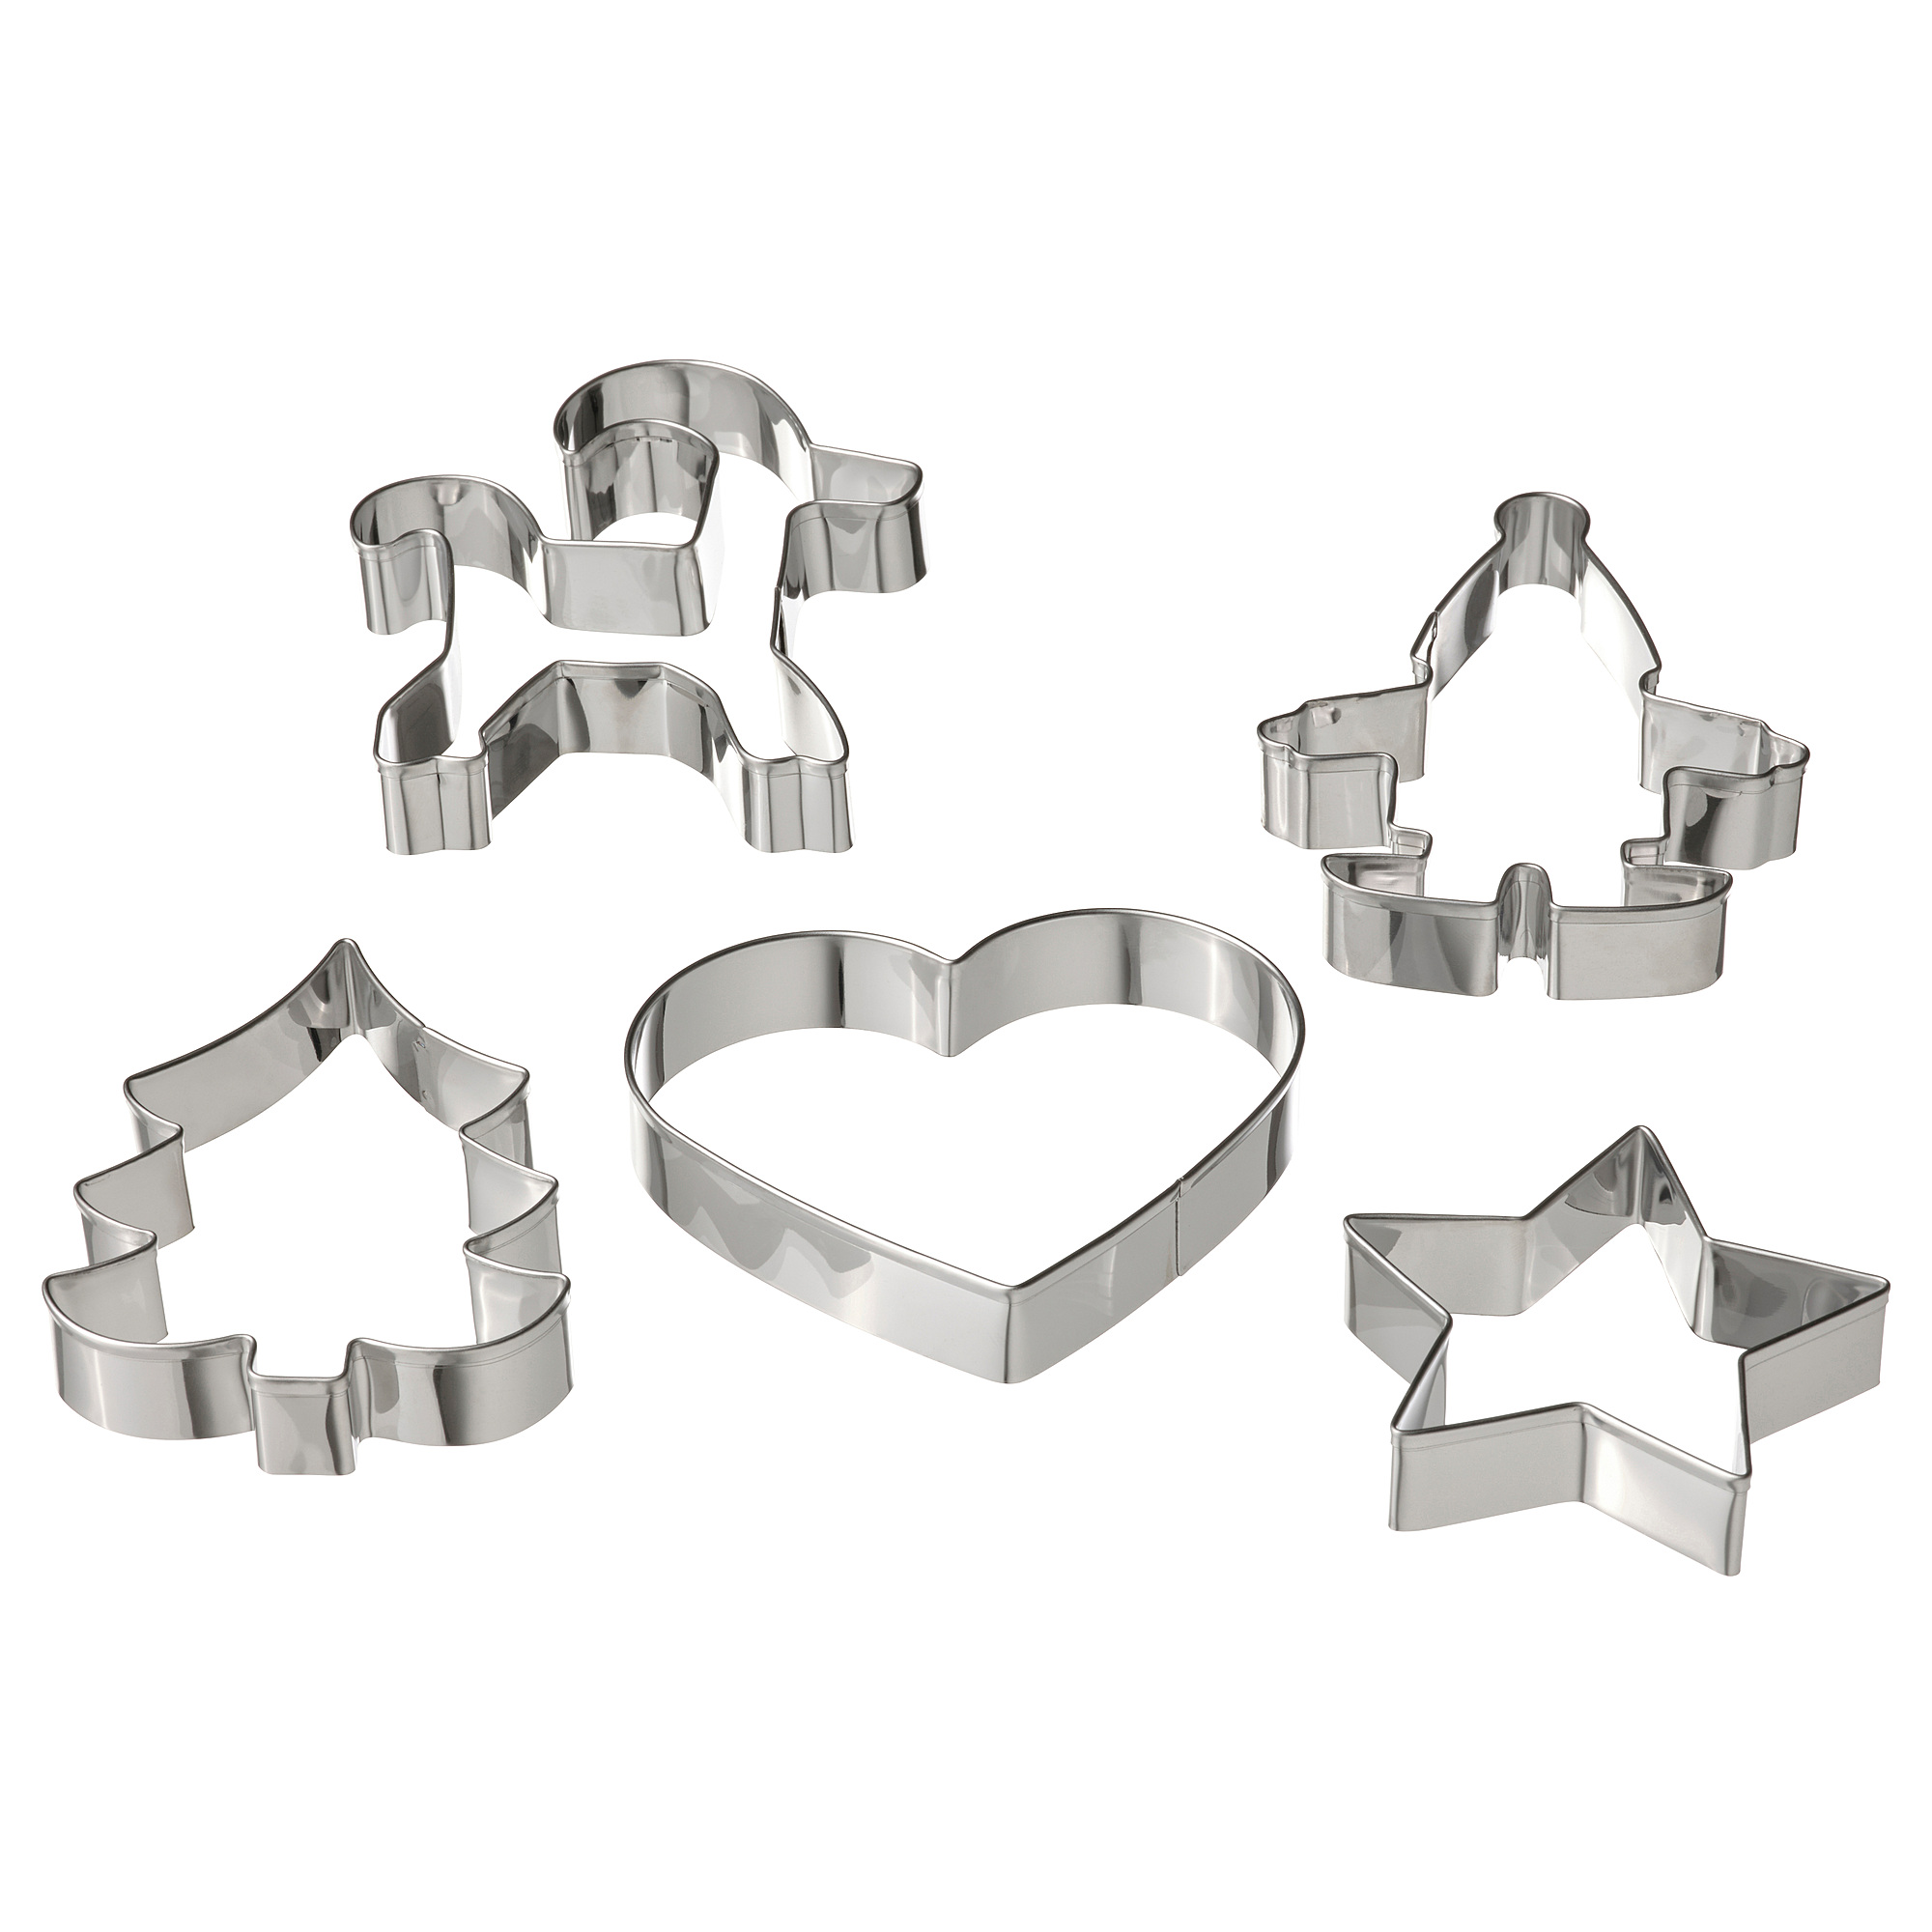 VINTERFINT pastry cutter, set of 5